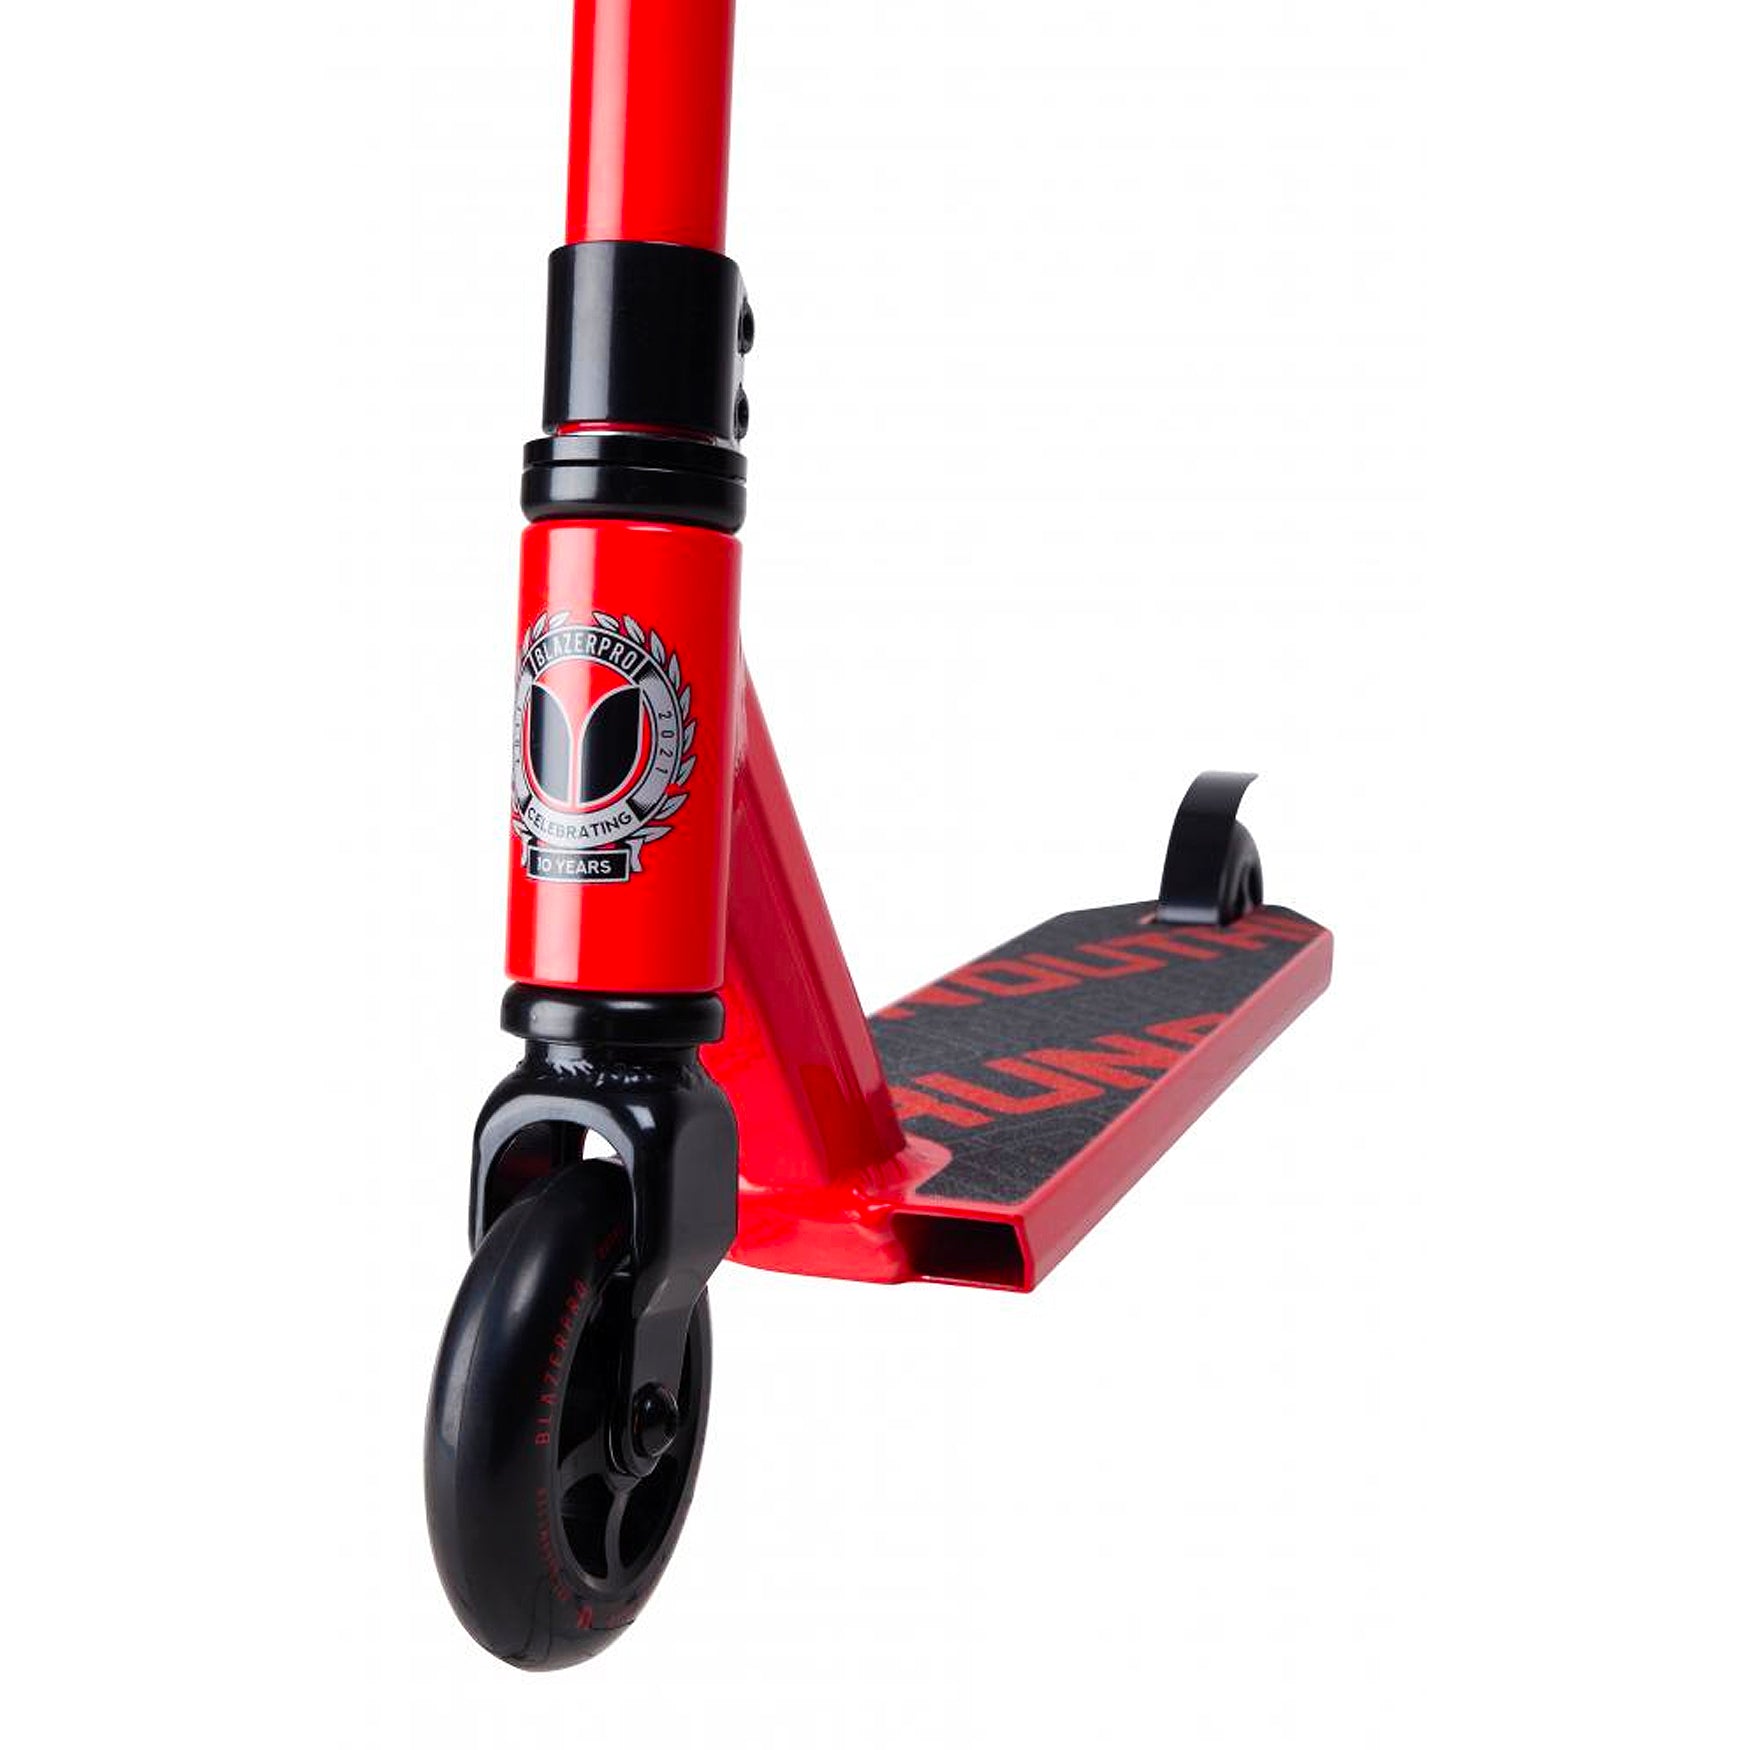 Blazer Pro Complete Outrun 2 Scooter - Red - Prime Delux Store